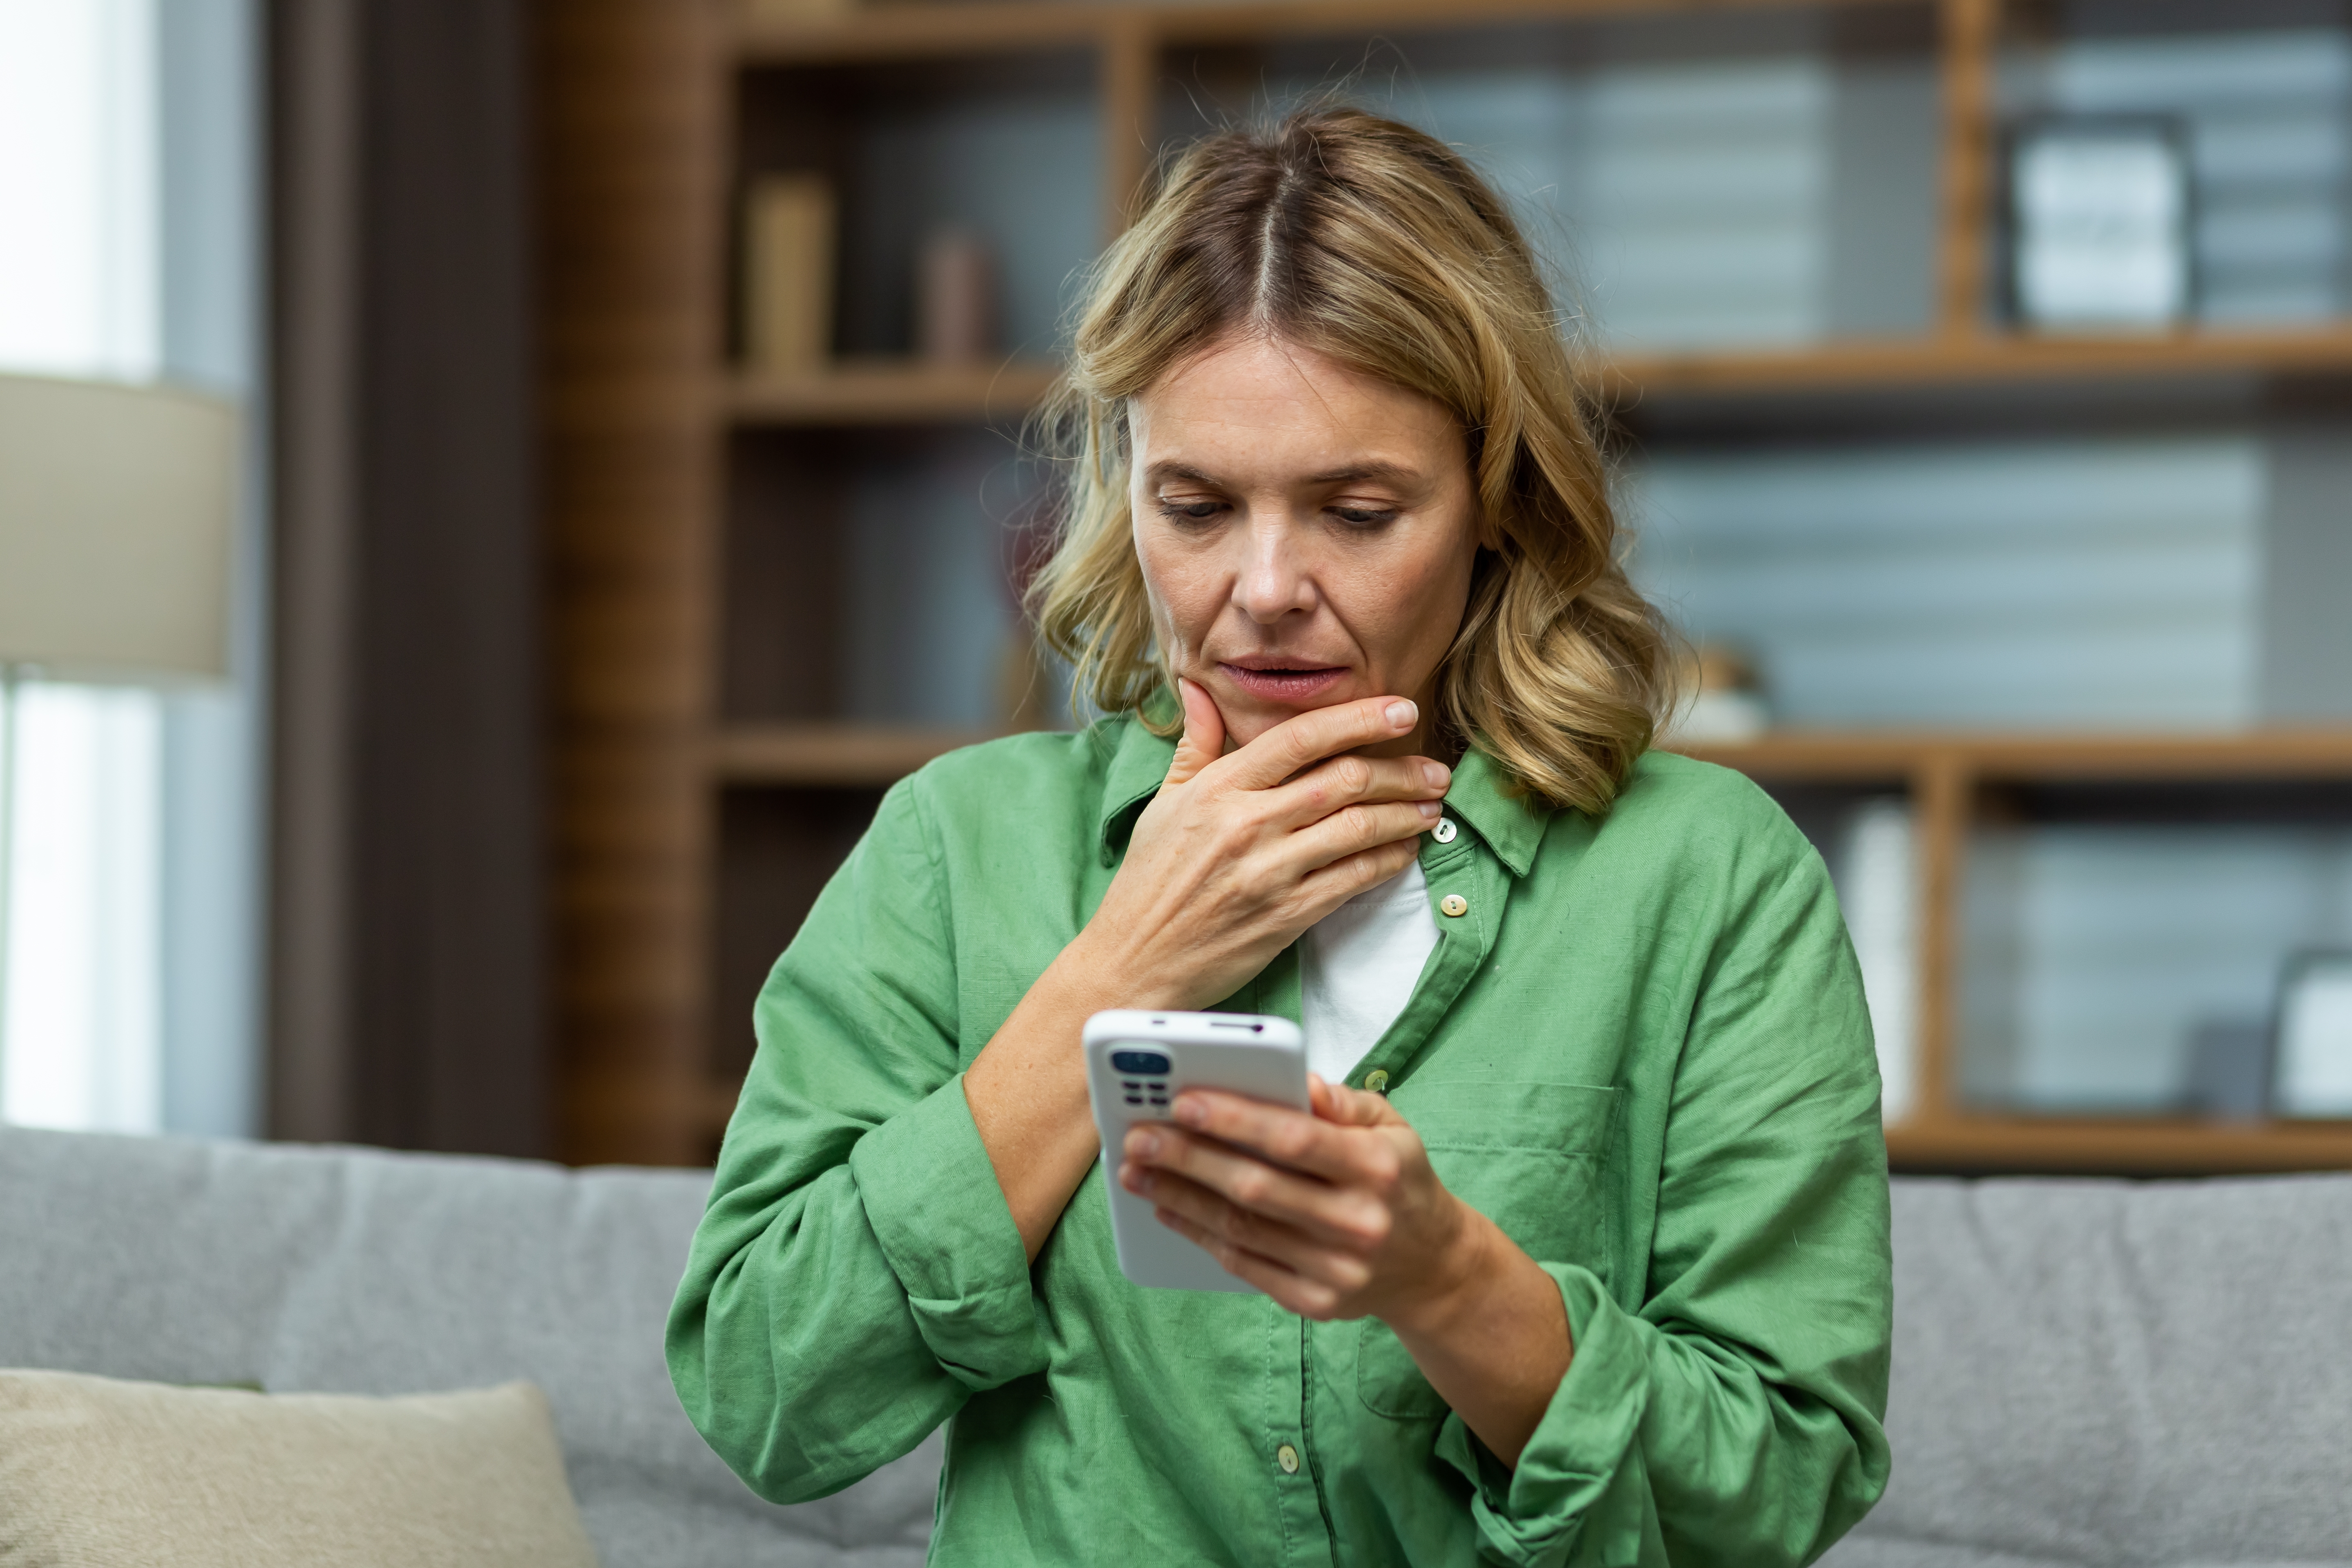 A worried woman holding her phone | Source: Shutterstock